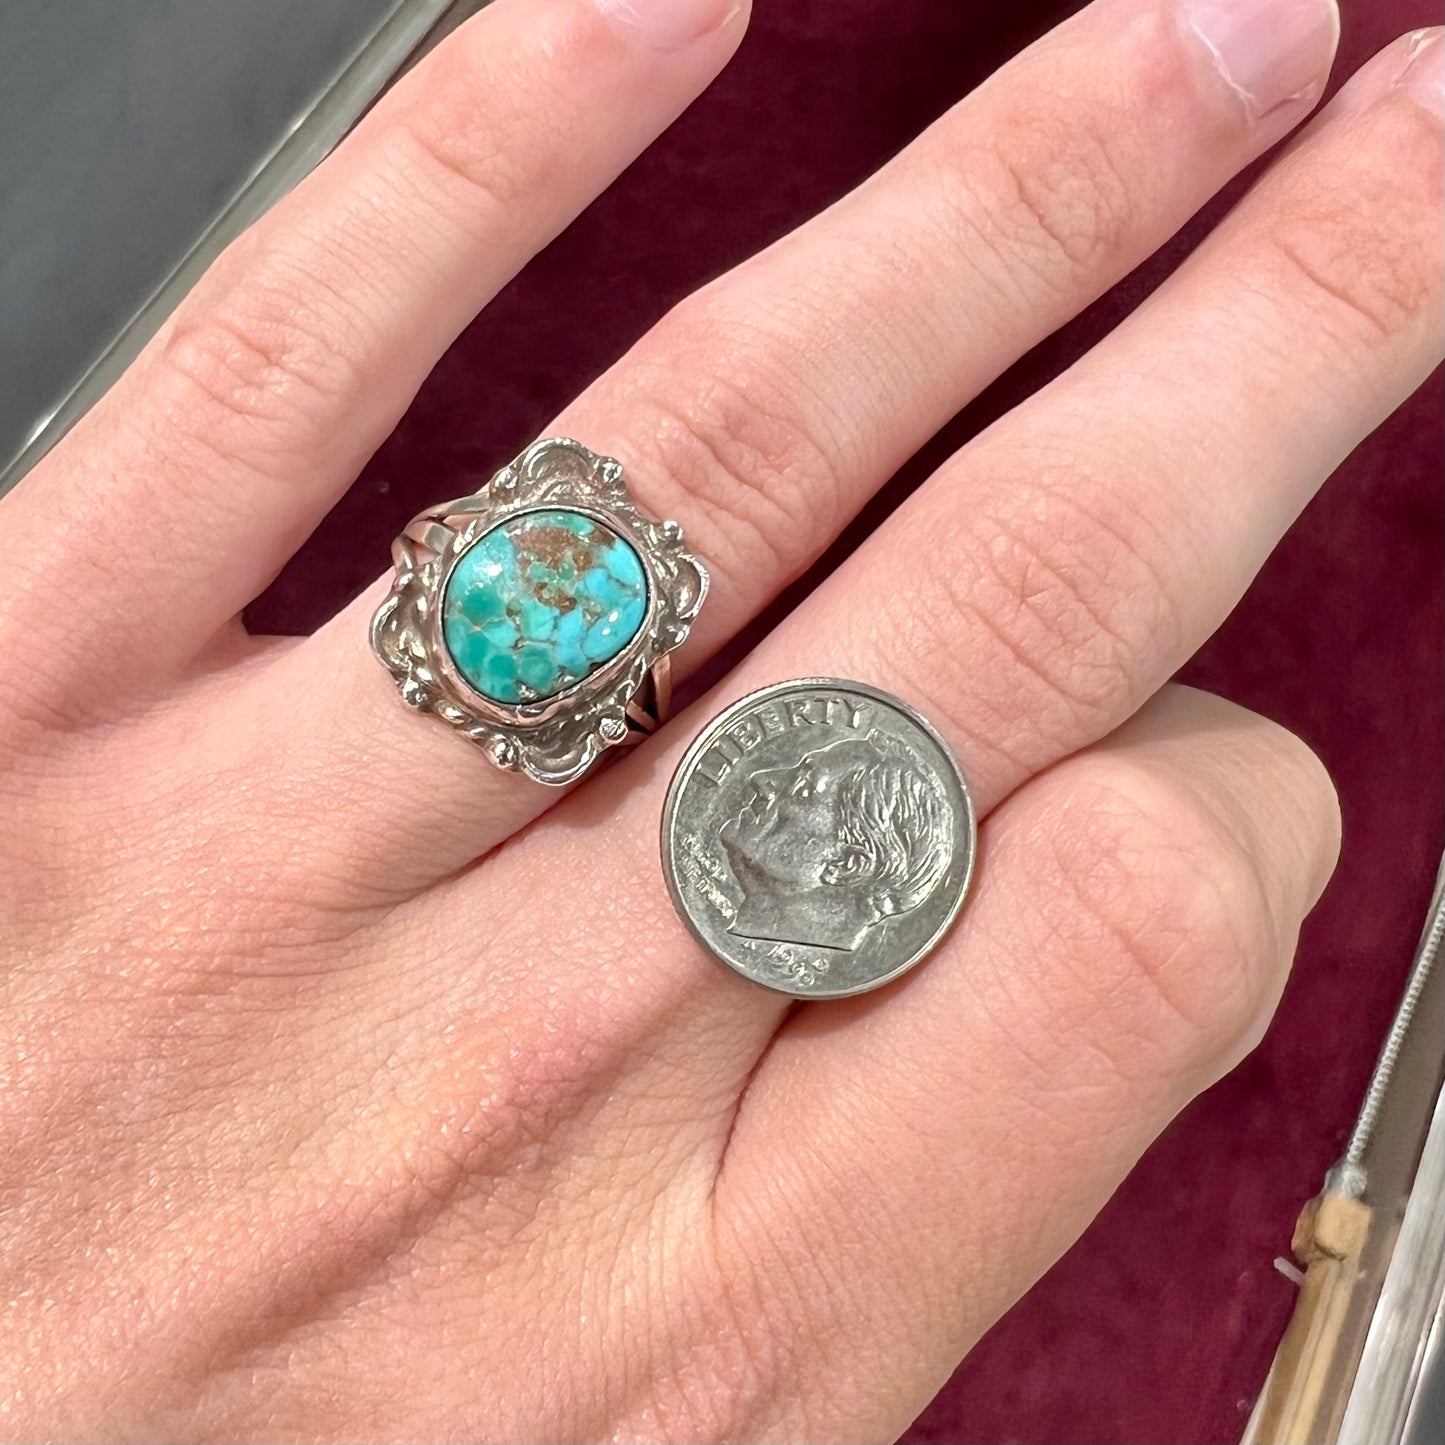 Meridian Silver & Turquoise 5-Piece Ring Set – Idyllwind Fueled by